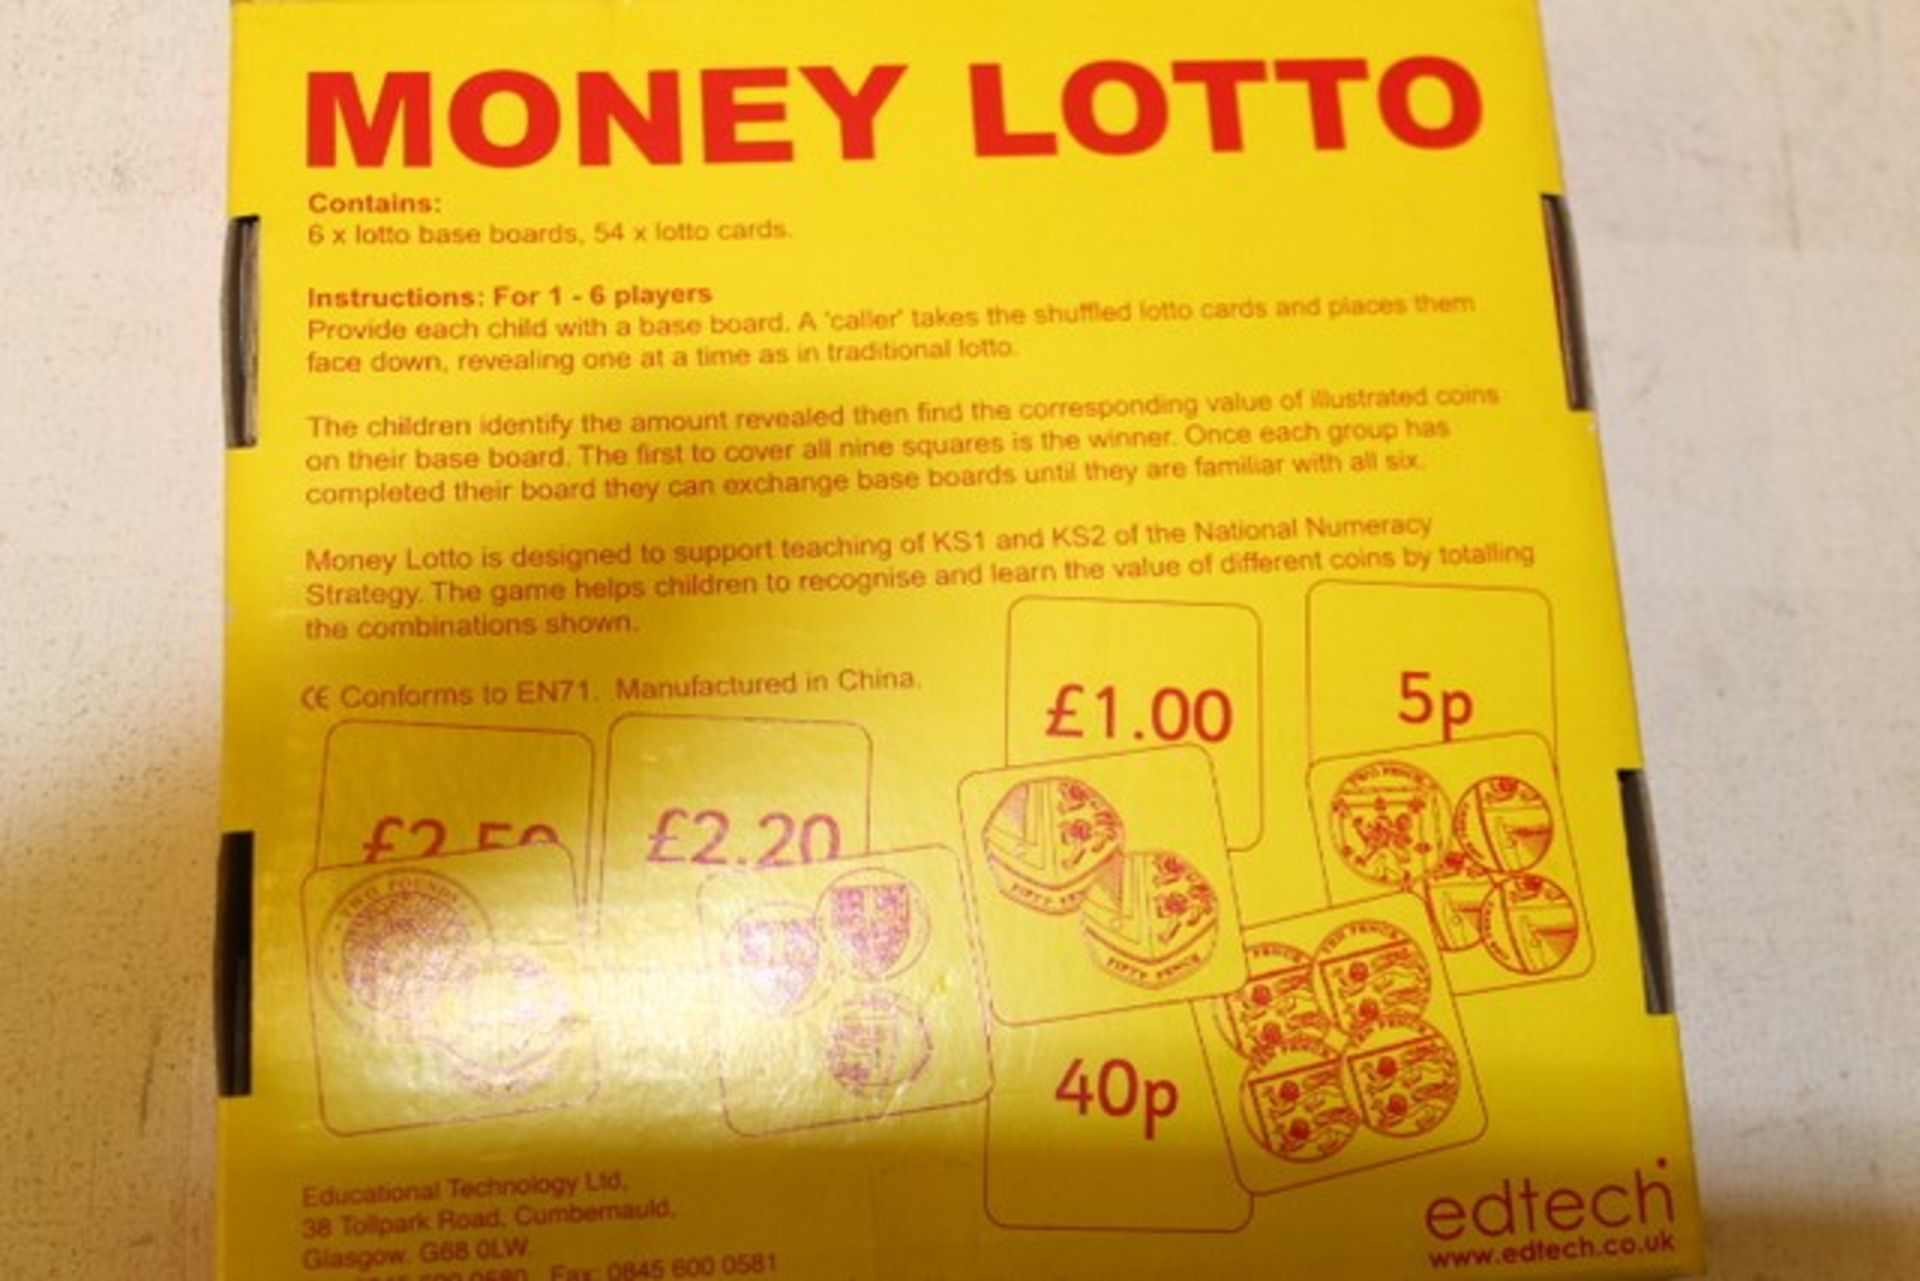 V Brand New Edtech Money Lotto Game To Teach Children Coin Values - Image 2 of 2